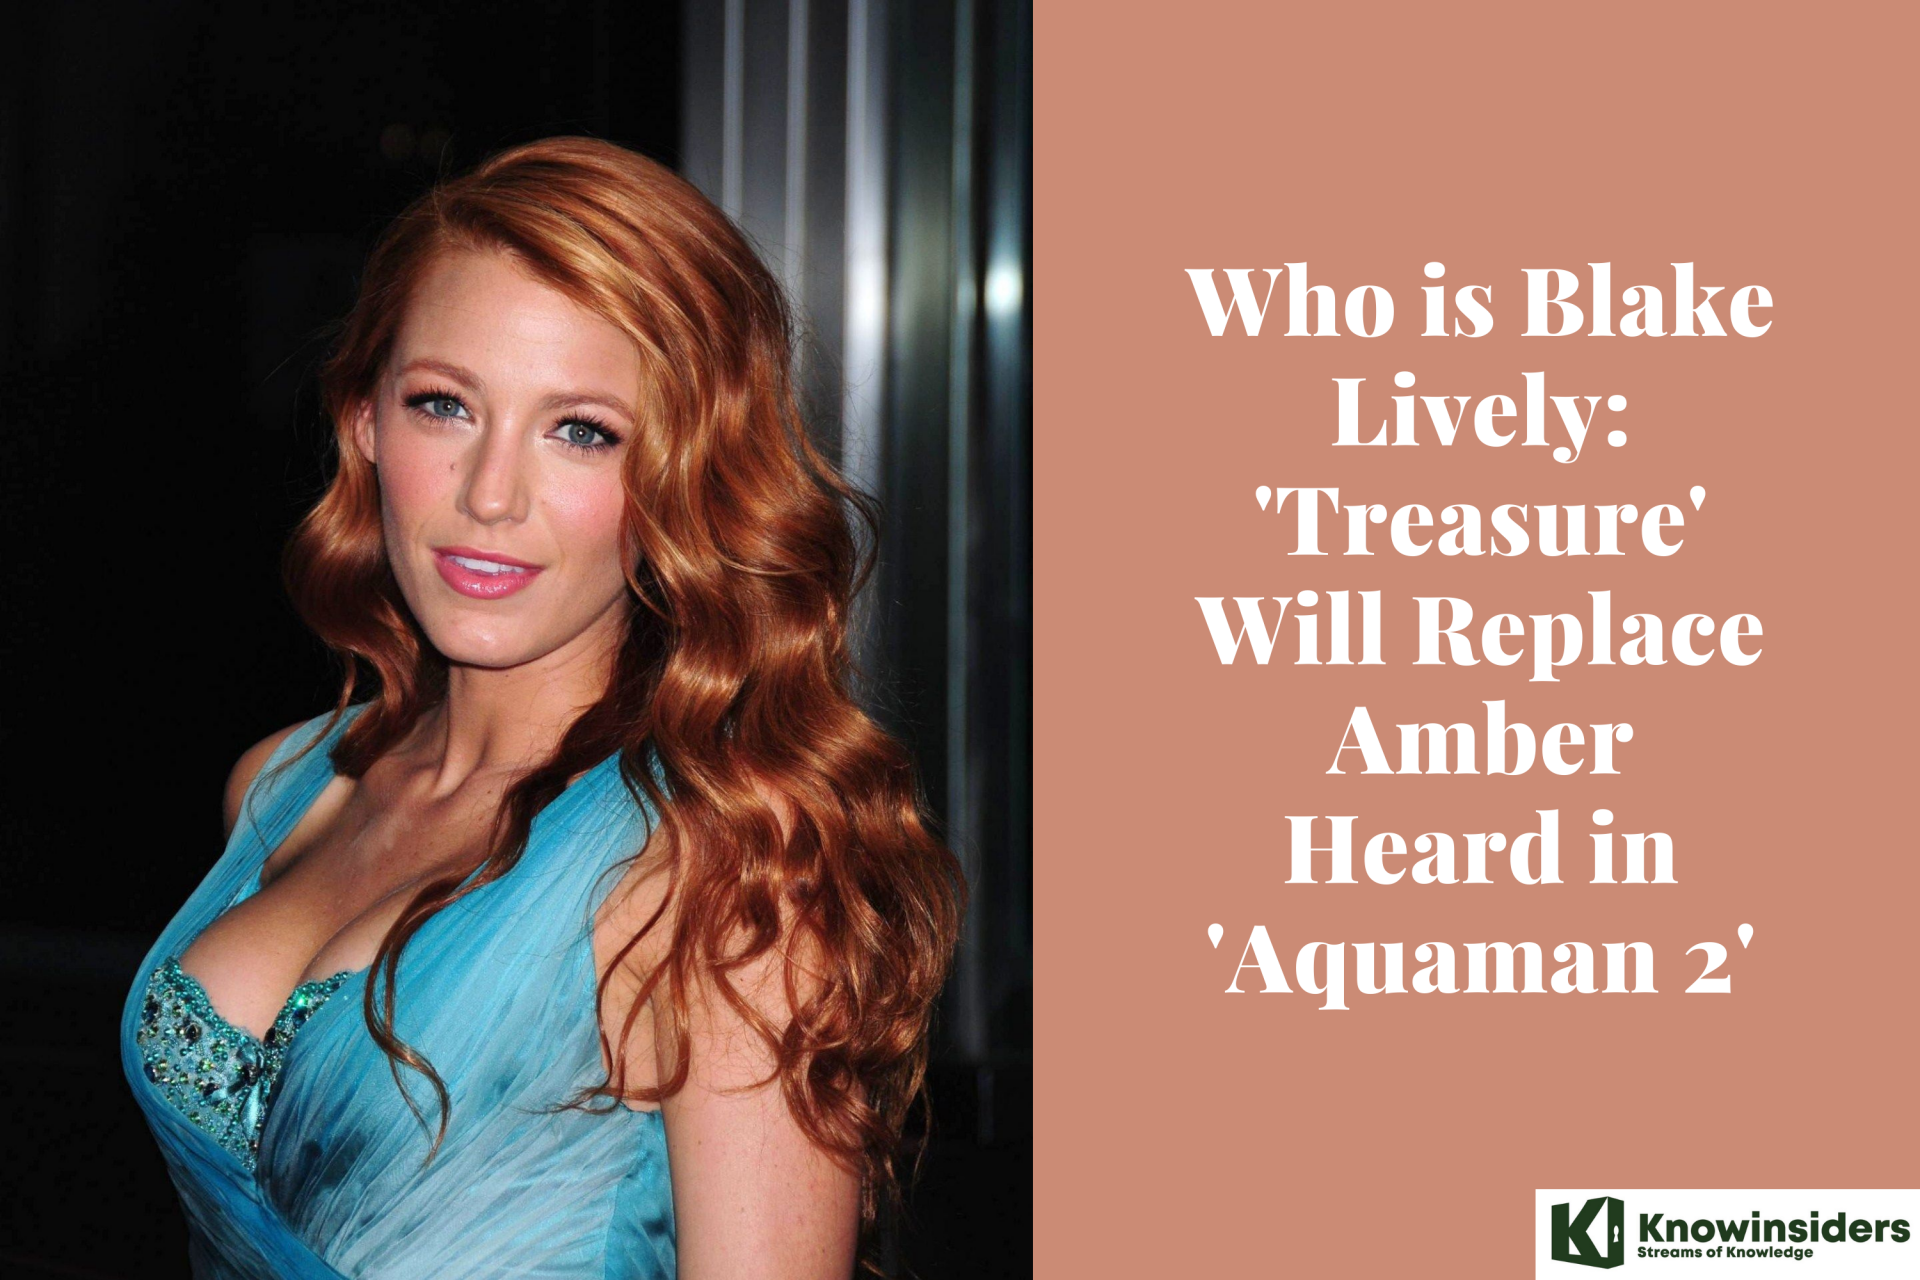 Who is Blake Lively: 'Treasure' Will Replace Amber Heard in 'Aquaman 2'